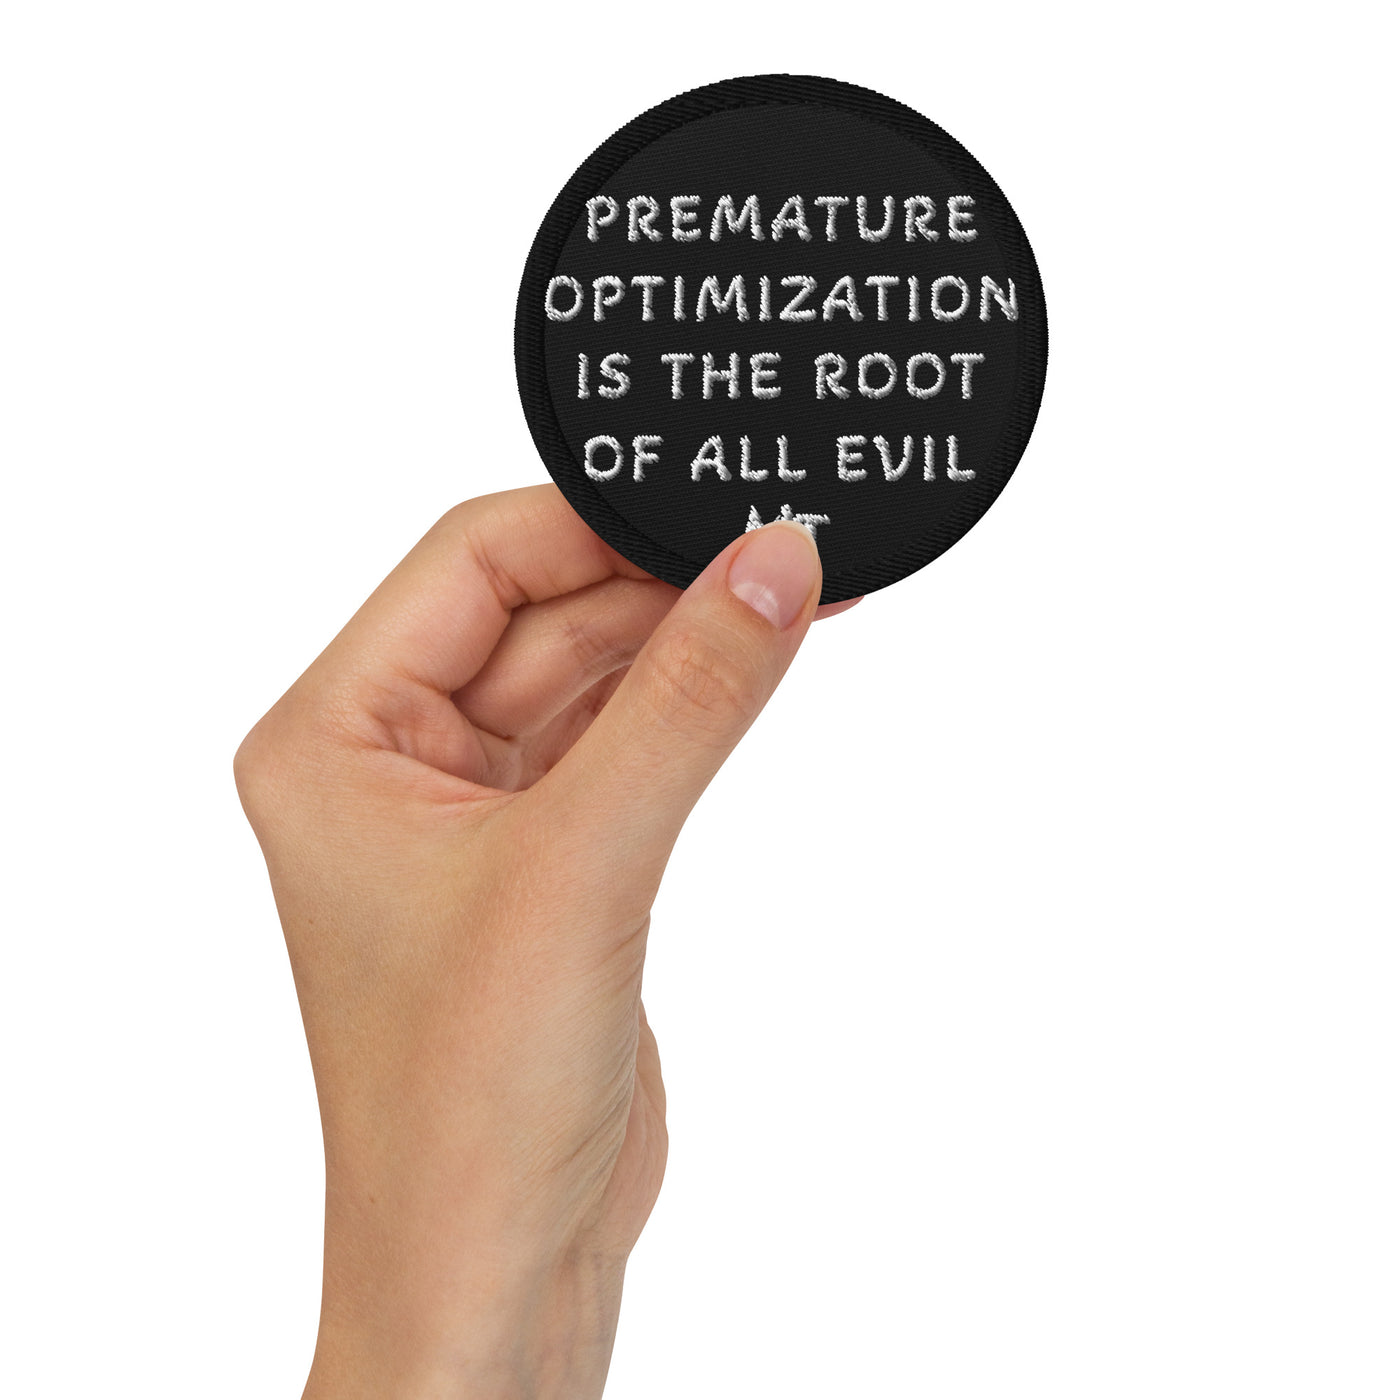 Premature Optimization is the Root of All Evil - Embroidered patches